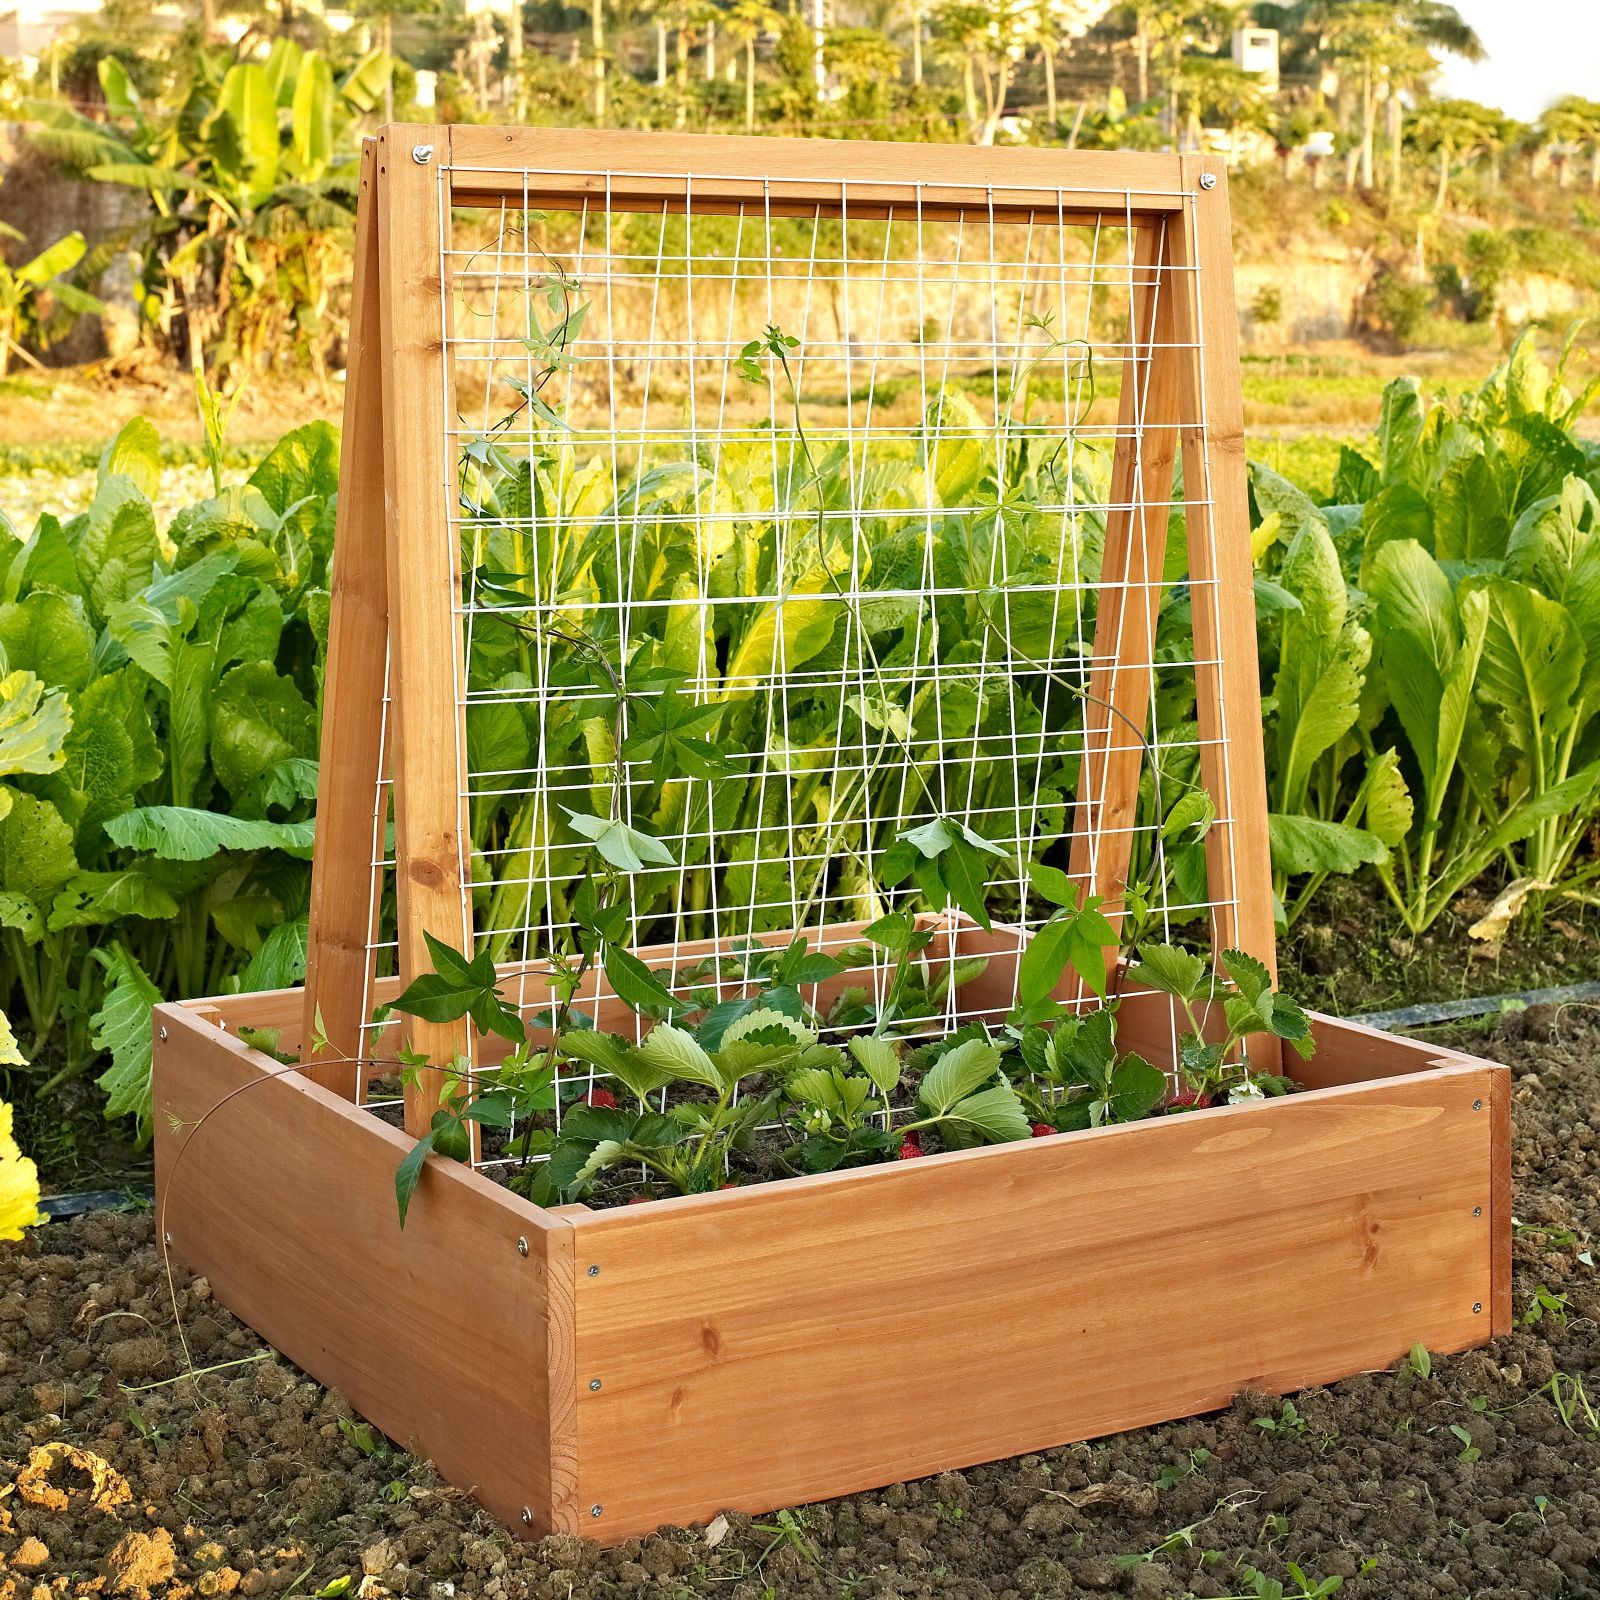 10 Raised Garden Beds That Fit Any Backyard Space | Wire trellis ...